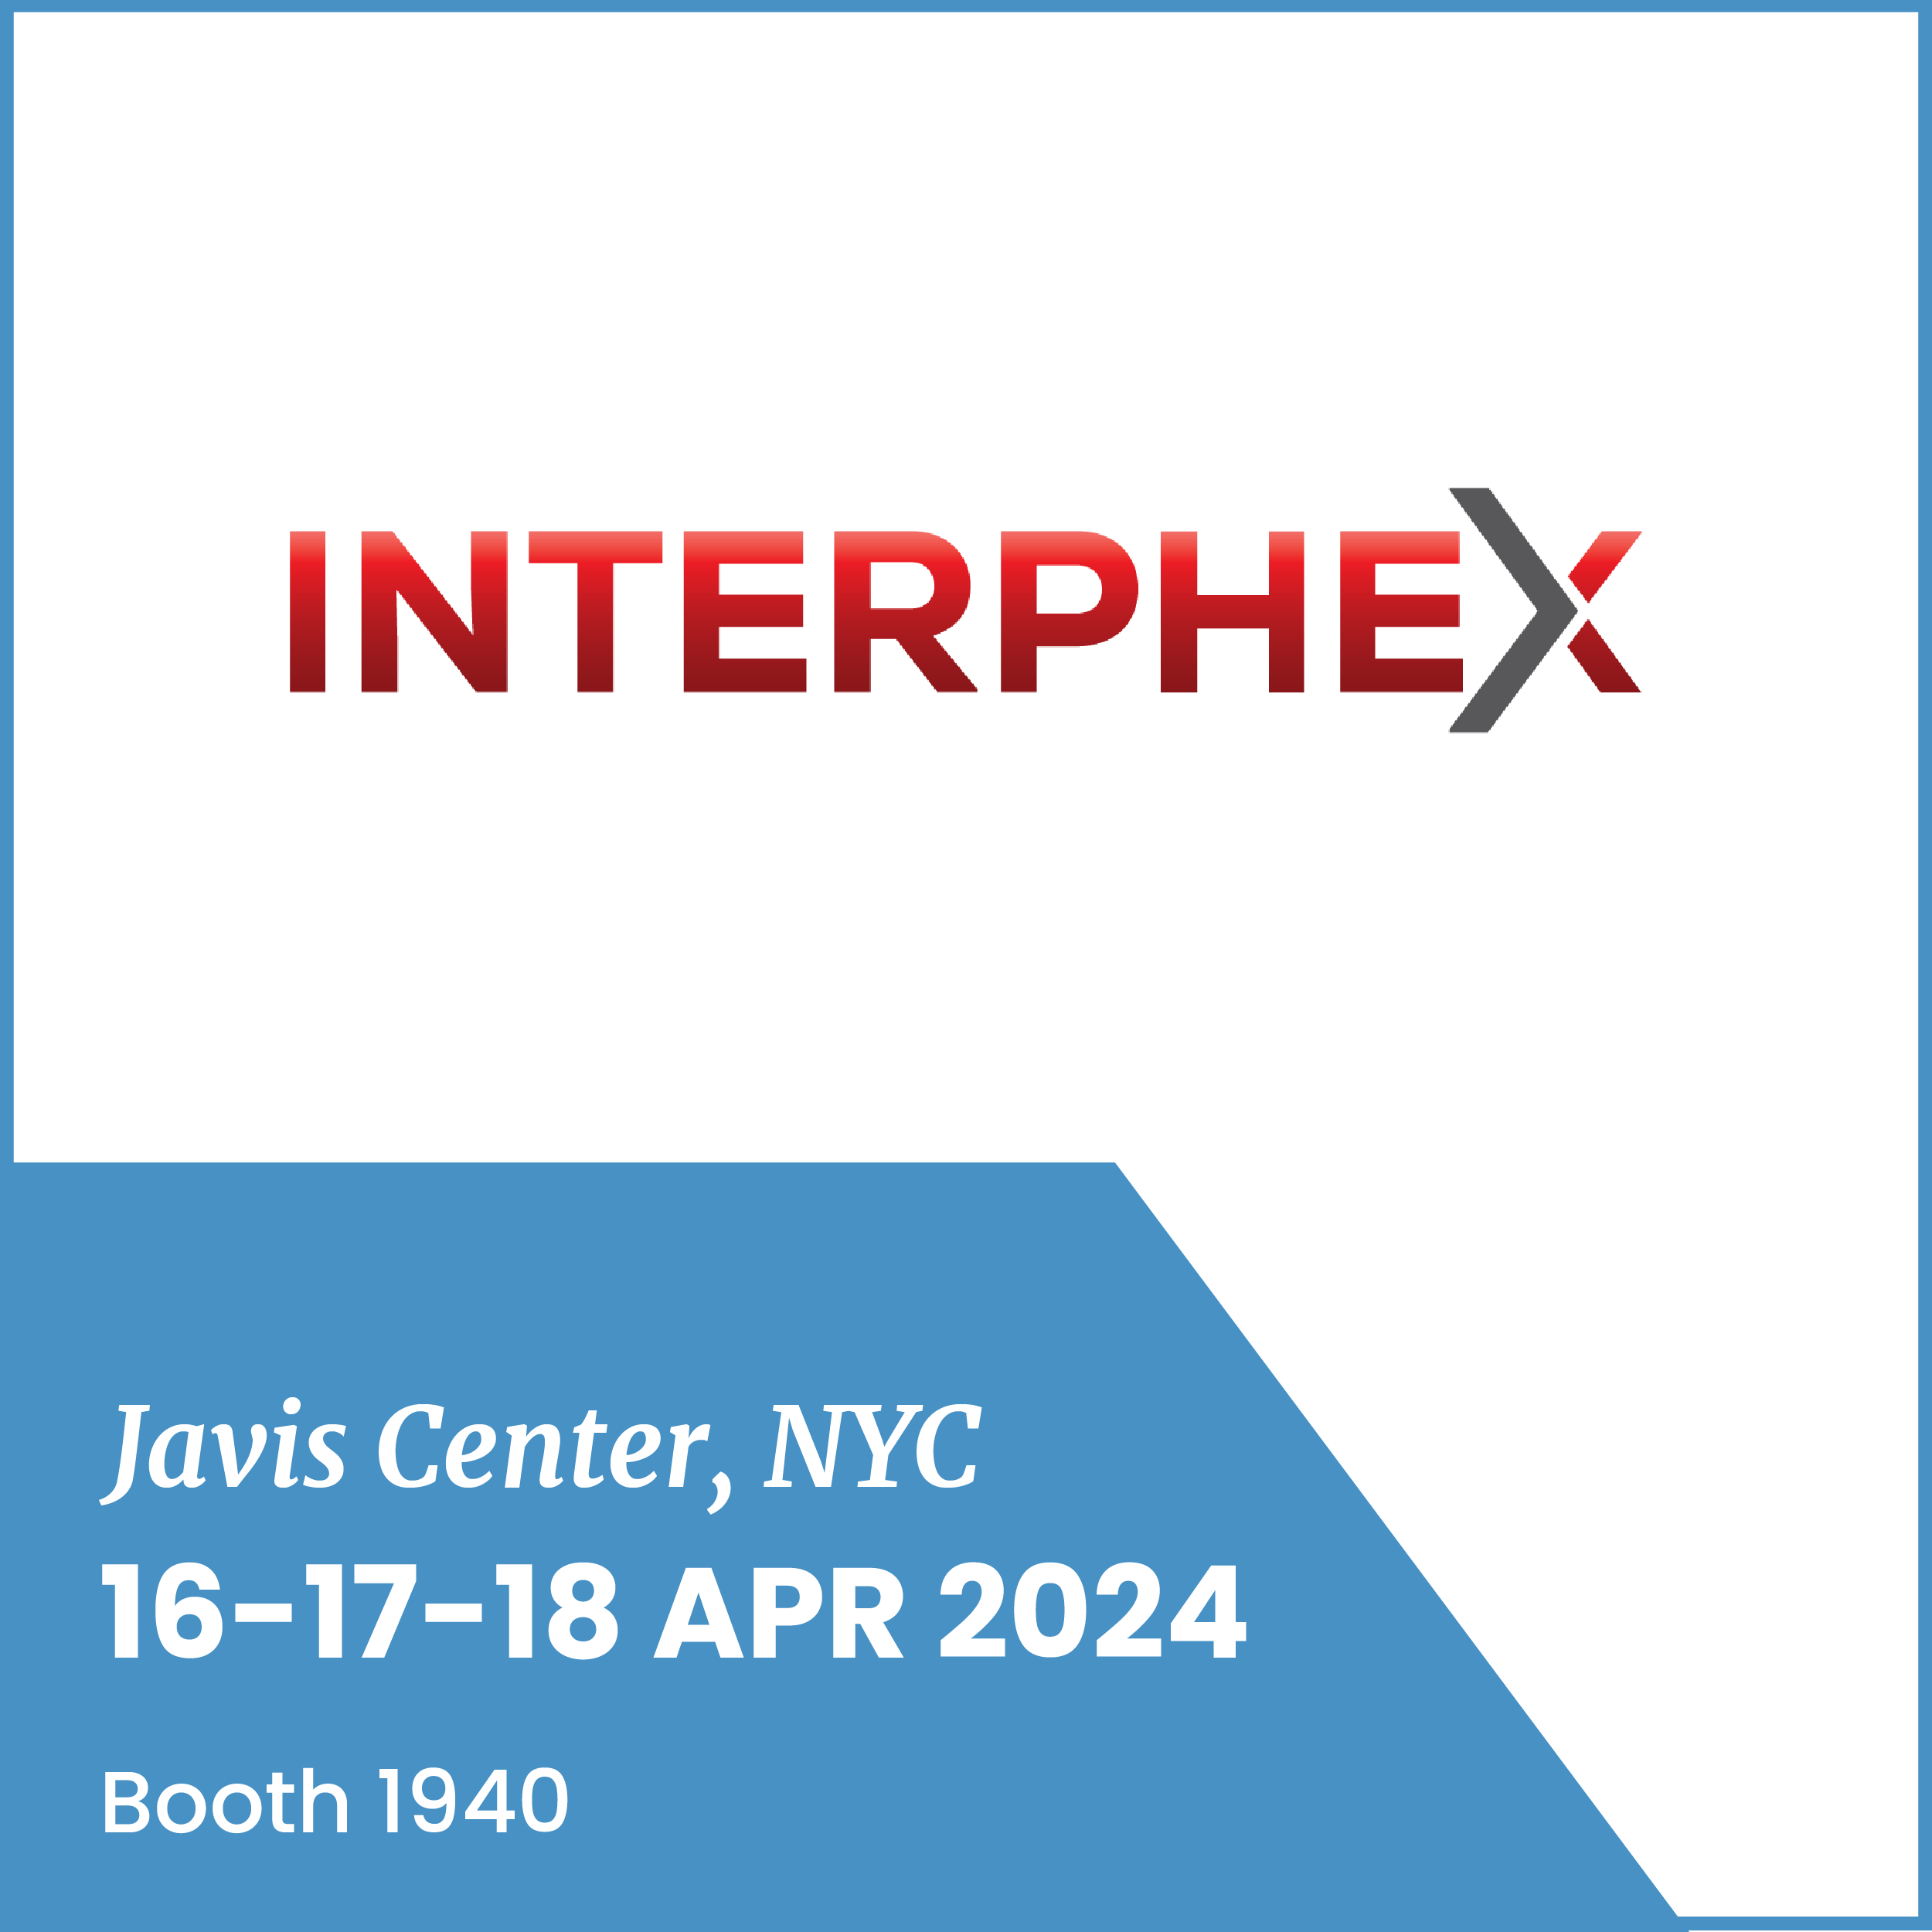 Teaser of the Interphex event. 16-18 April, 2024. Booth 1940. Javis Center NYC